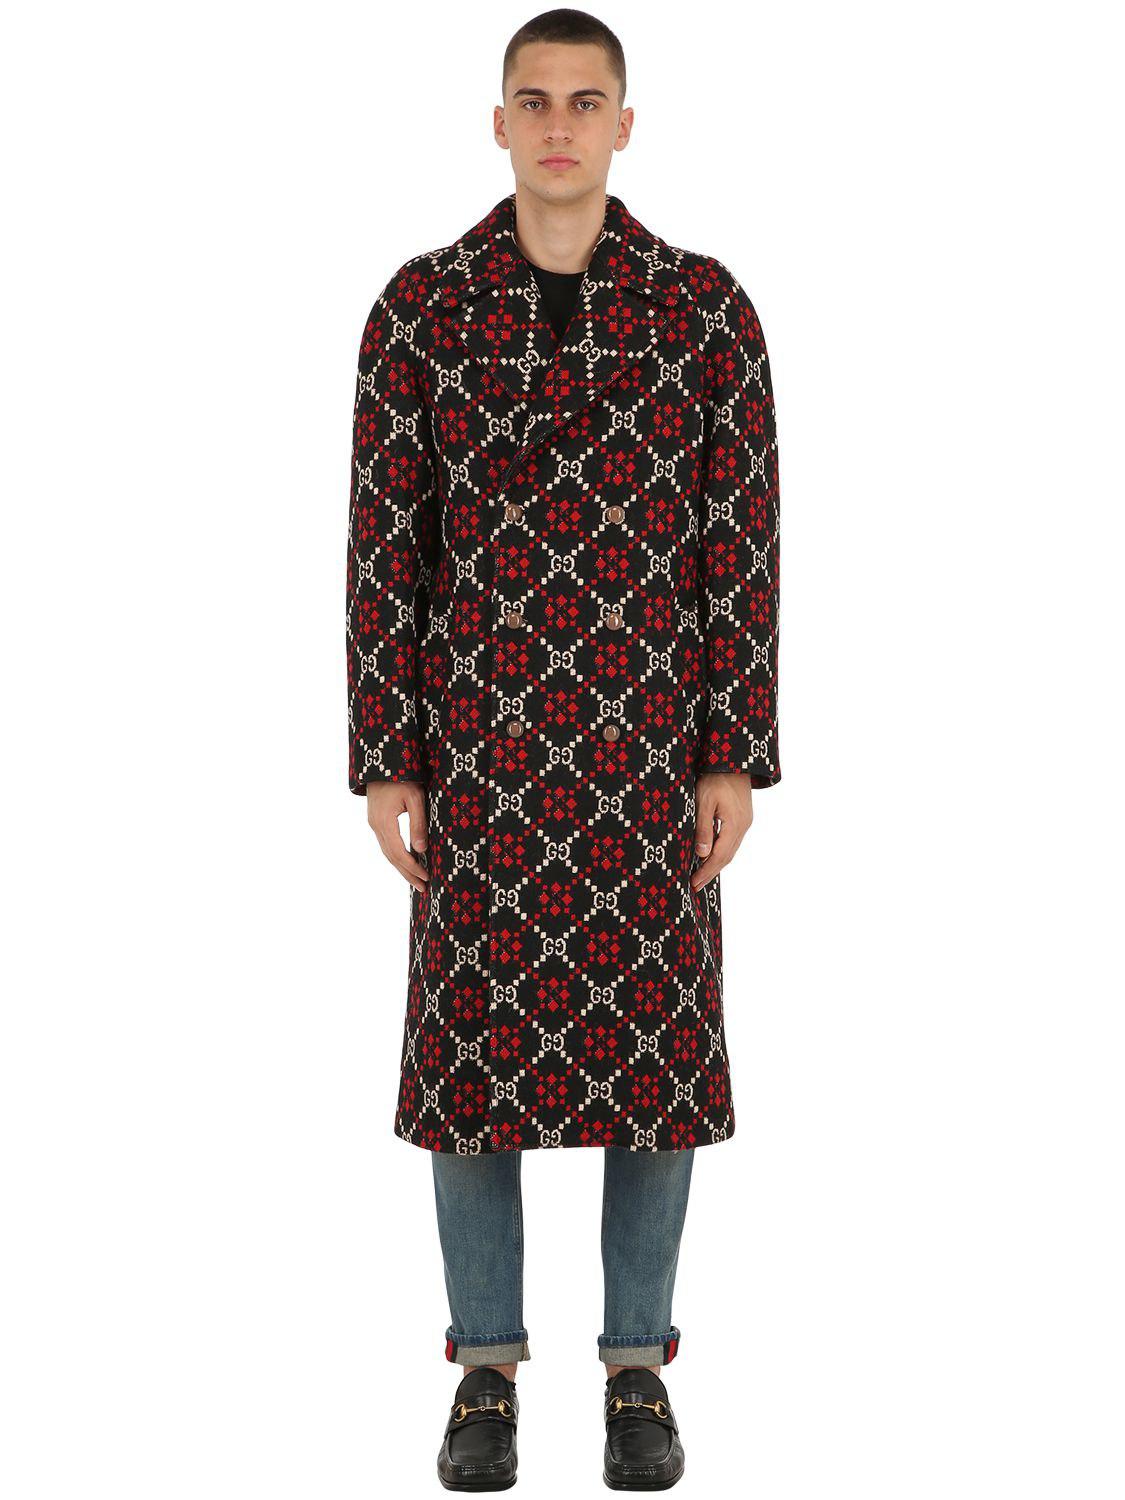 Gucci Wool Black And Red GG Diamond Coat for Men - Lyst